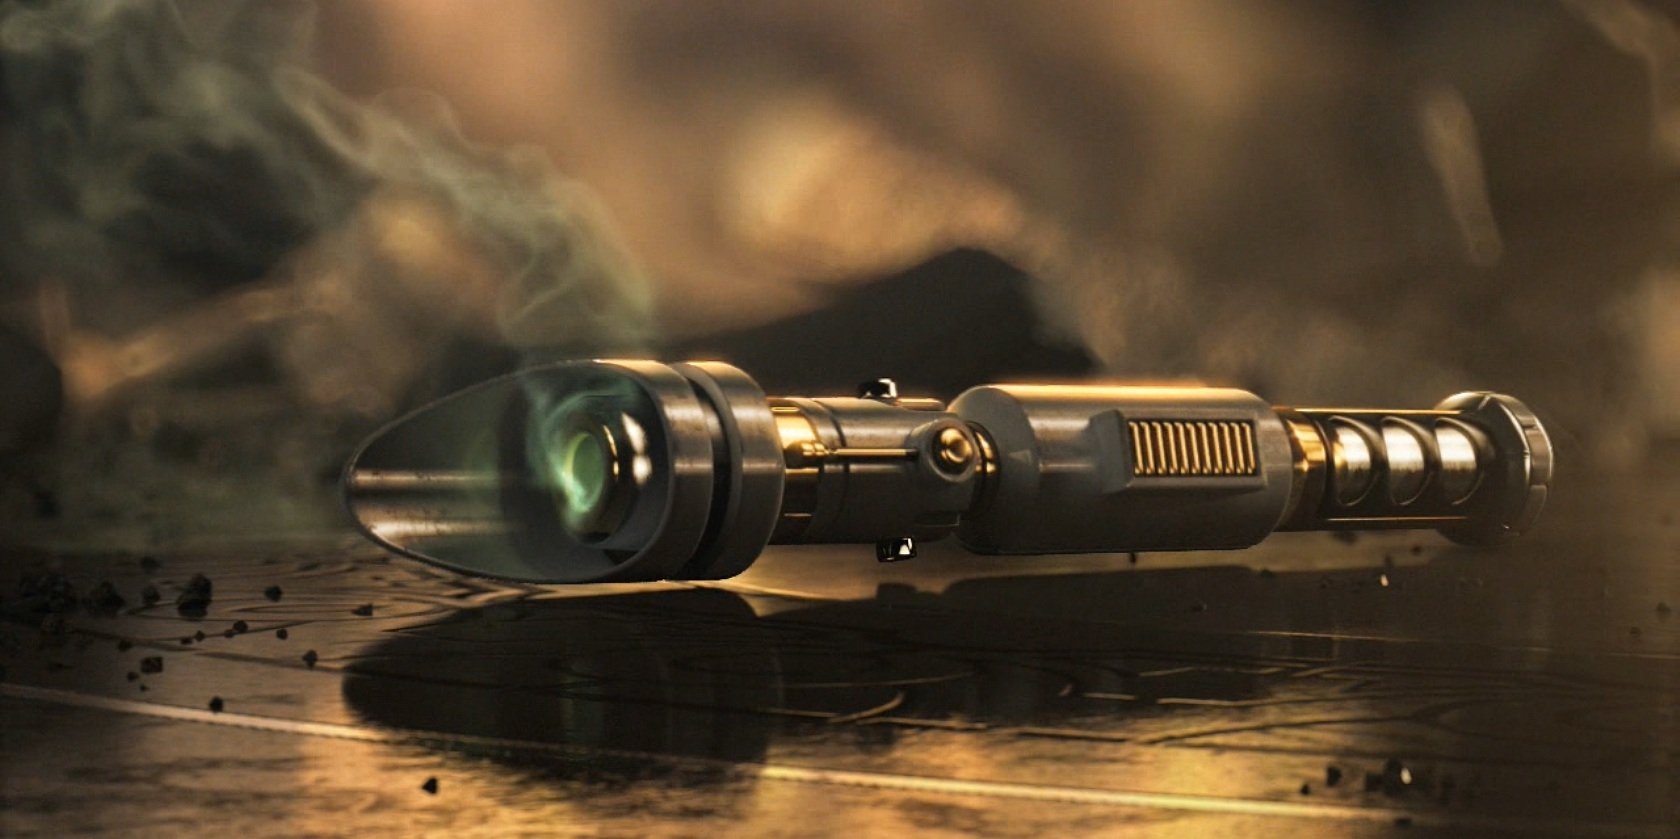 Ranking the Lightsabers - Top Ten || Issue #1